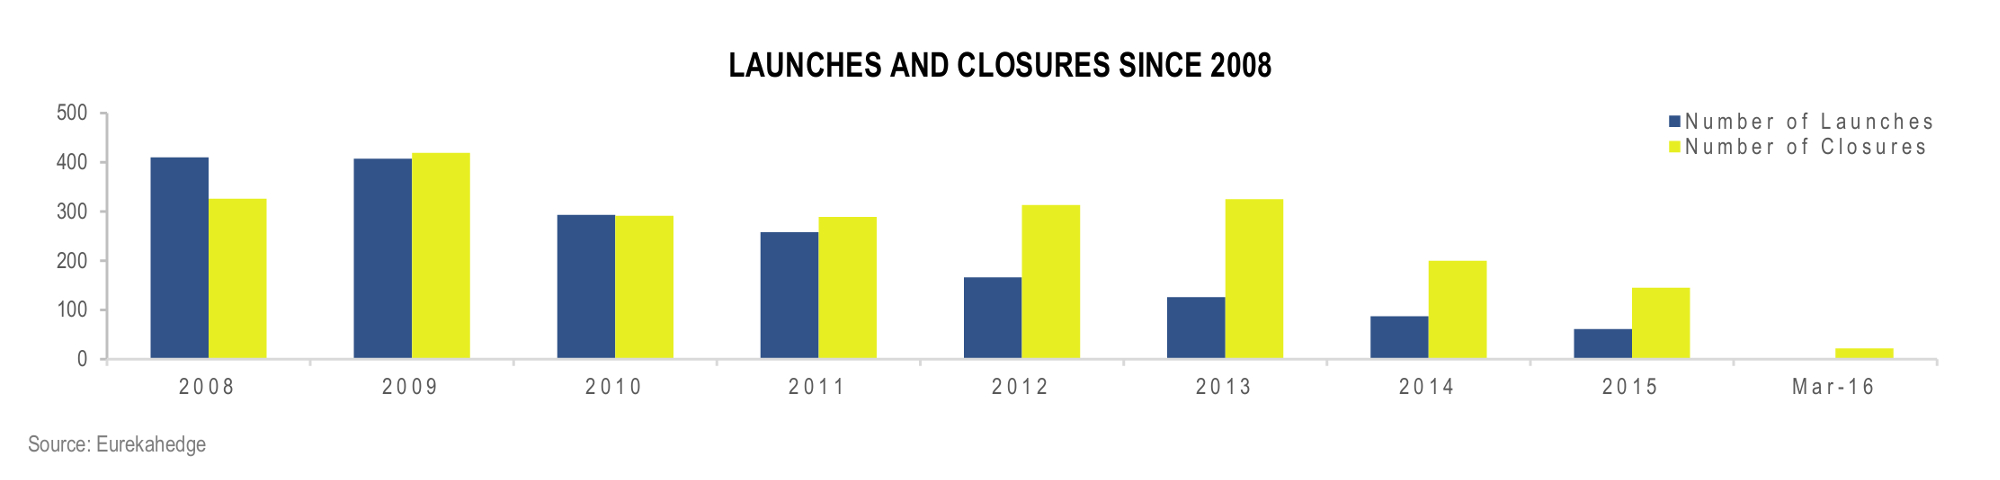 Funds of Hedge Funds Infographic May 2016 - Fund launches and closures since 2008